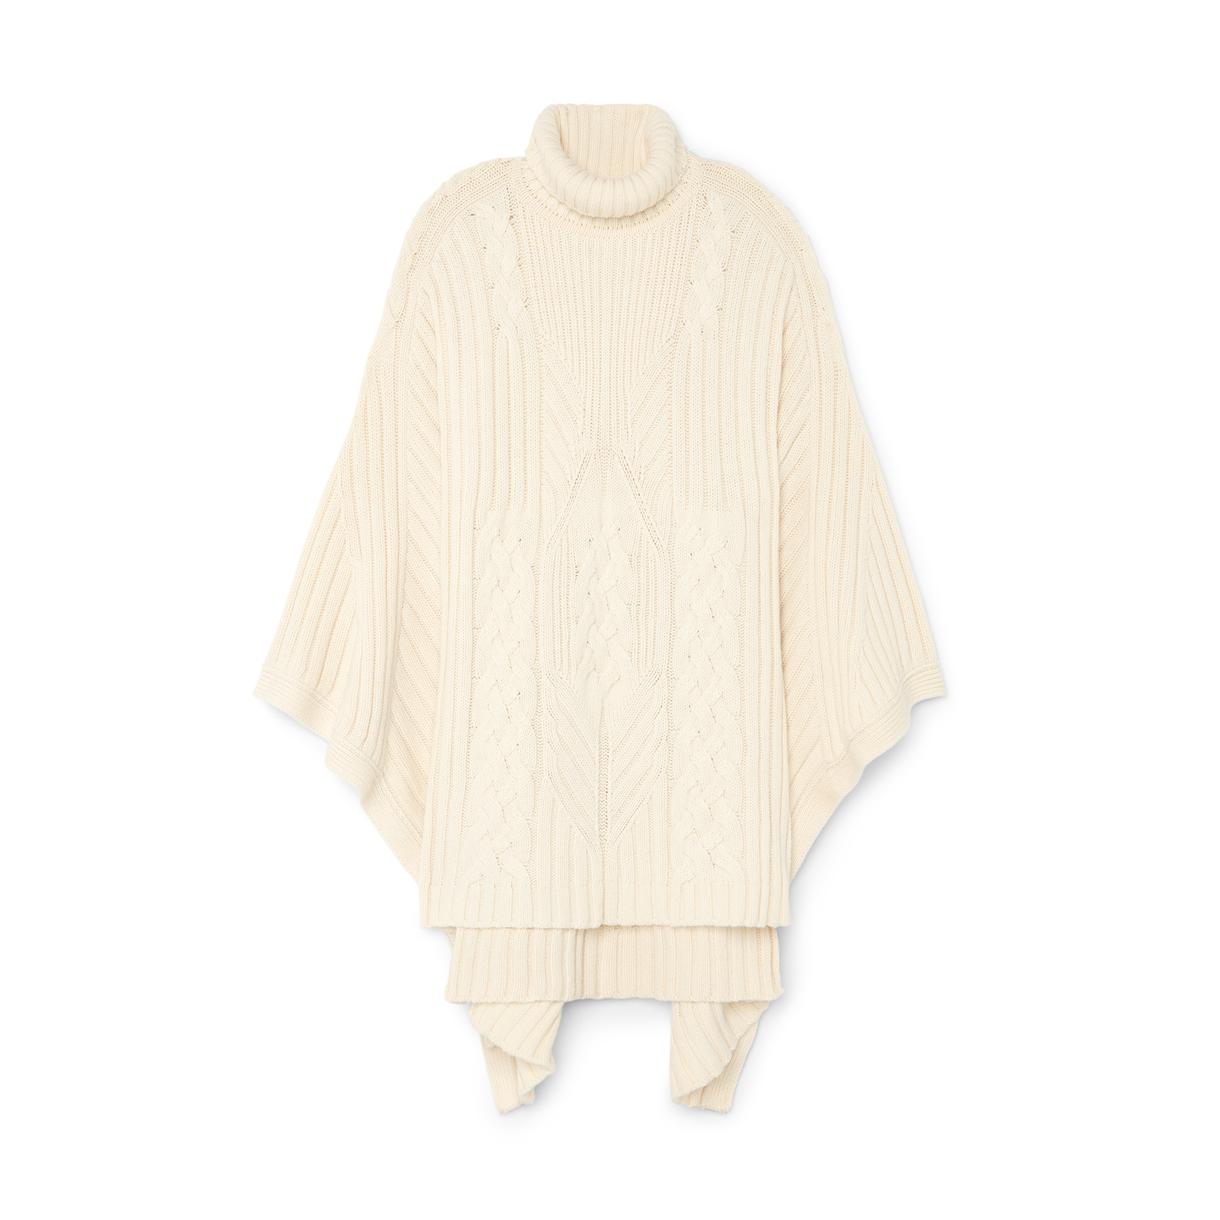 G. Label by goop Bloomer Cable-Knit Poncho